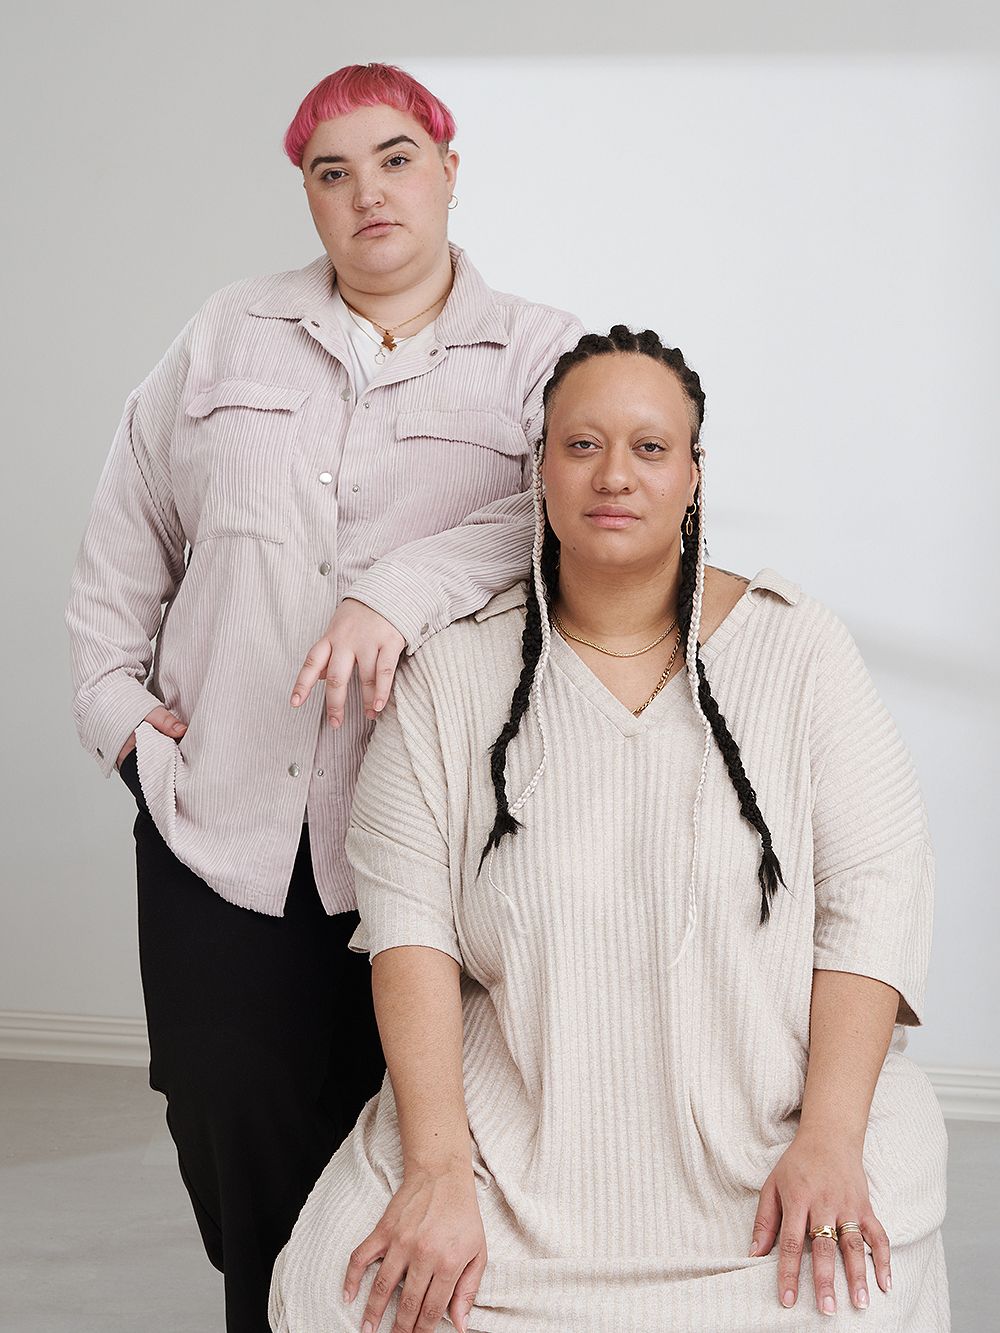 Meriam Trabelsi (left) and Caroline Suinner of the Soft Collective